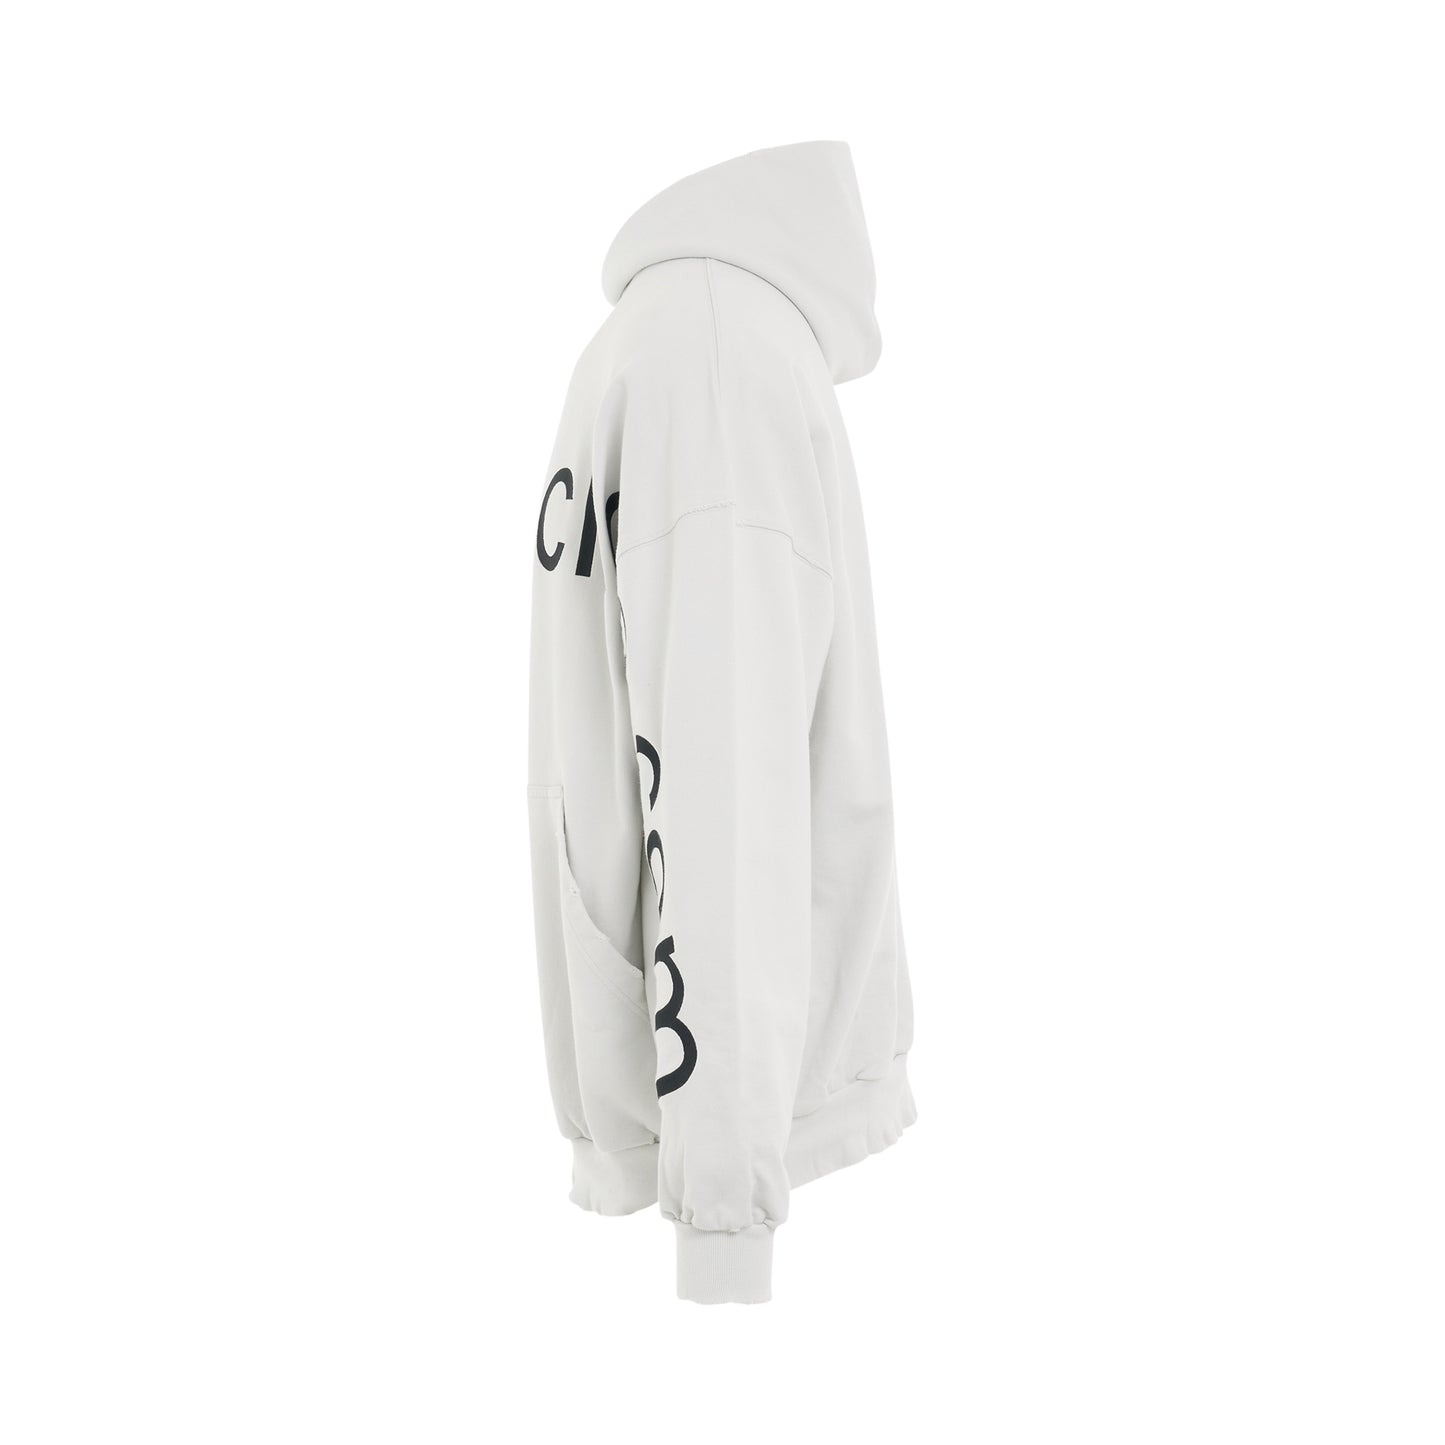 Bal.Com Oversized Hoodie in Dirty White